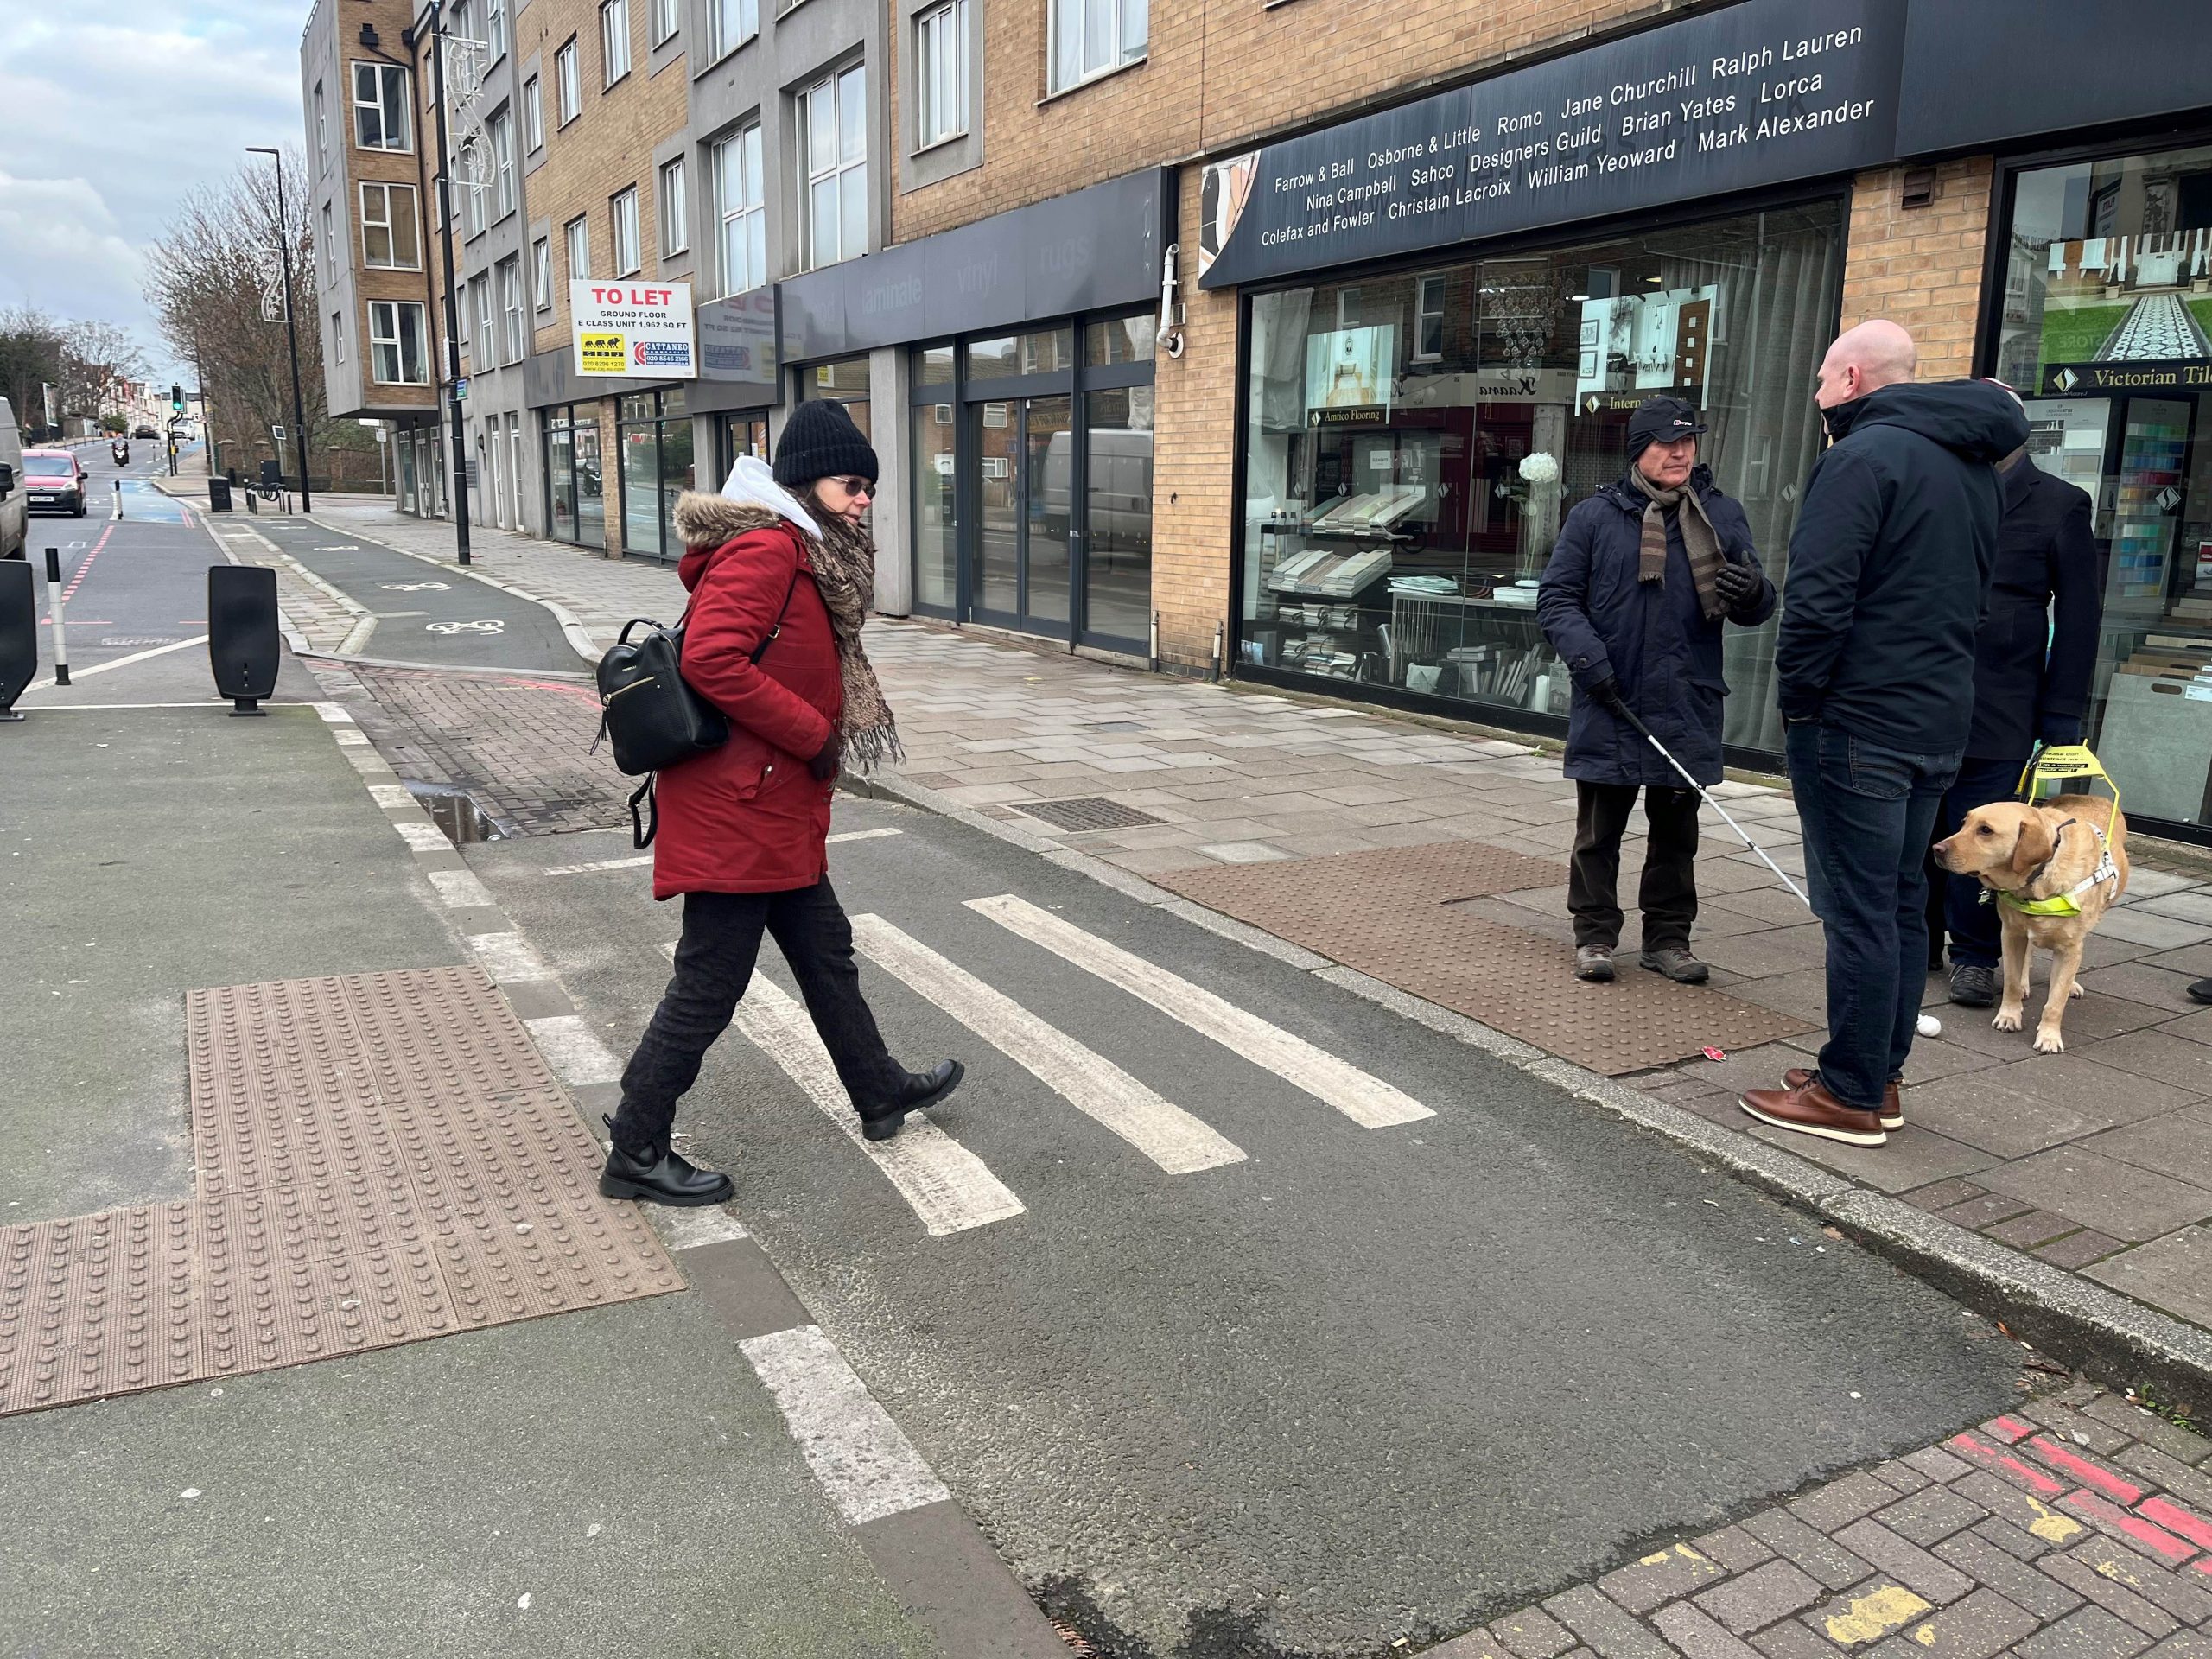 Vicky, South West London SLC volunteer, crossing a zebra crossing on a 'floating bus stop'. Fellow SW London volunteer, Harry is pictured on the path alongside a representative from Wandsworth Council.